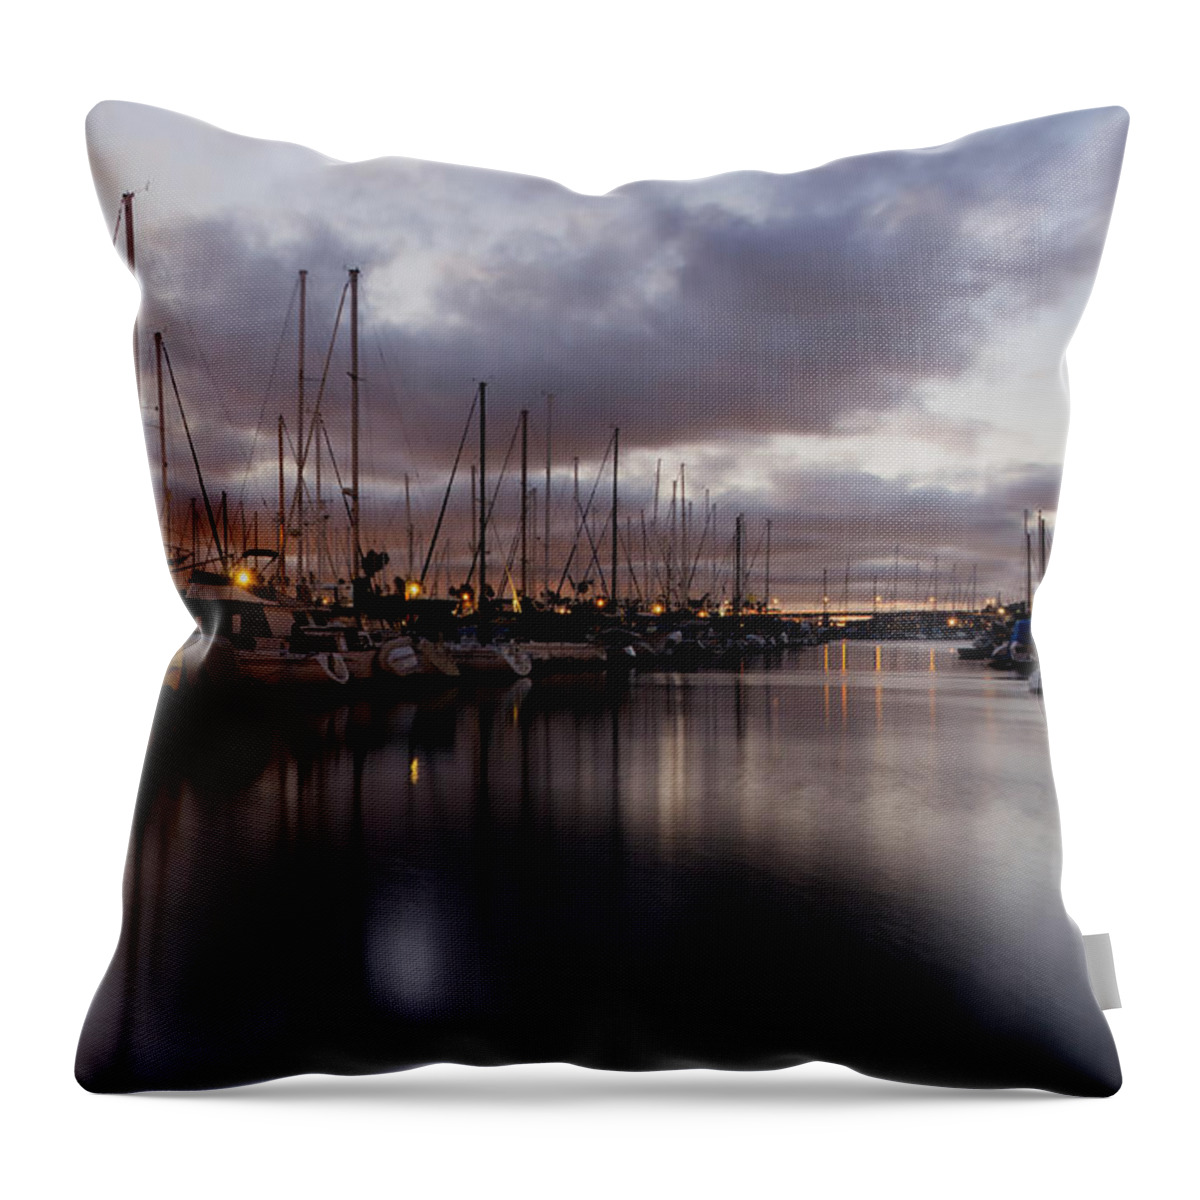 Sunset Throw Pillow featuring the photograph Farewell To Summer by Heidi Smith